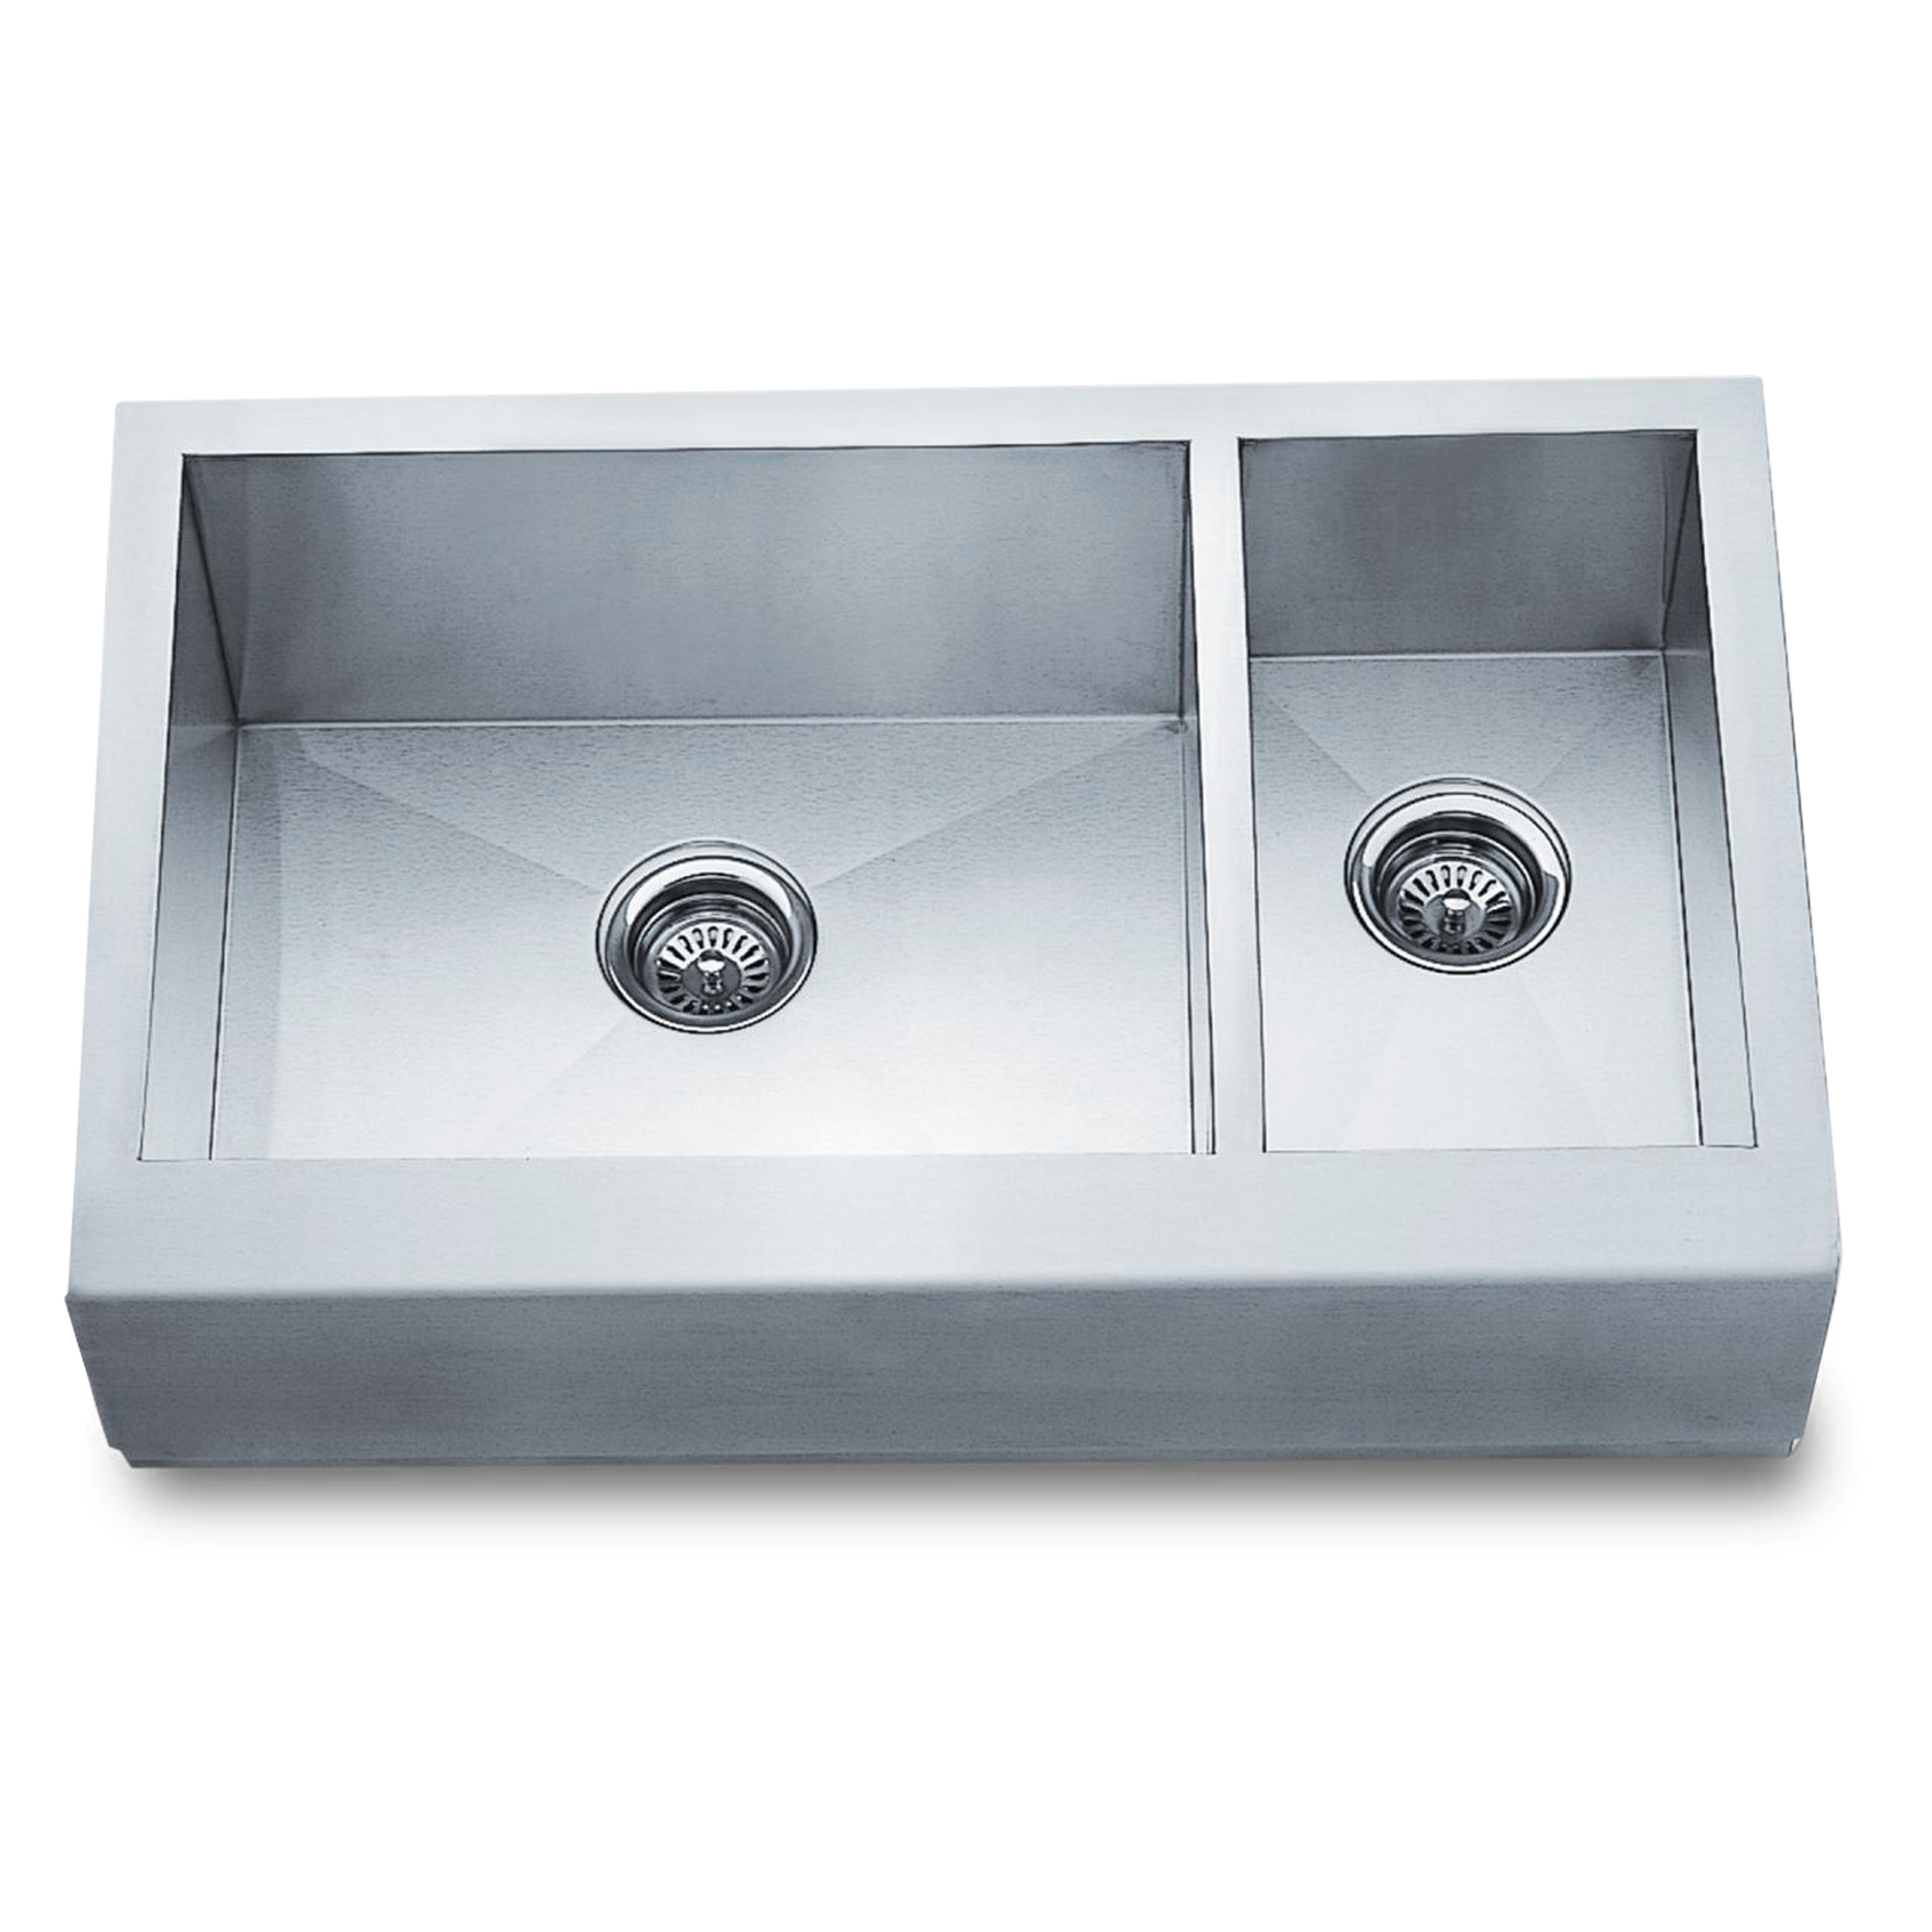 A seamless, contemporary, stainless steel double kitchen sink for under mount application.